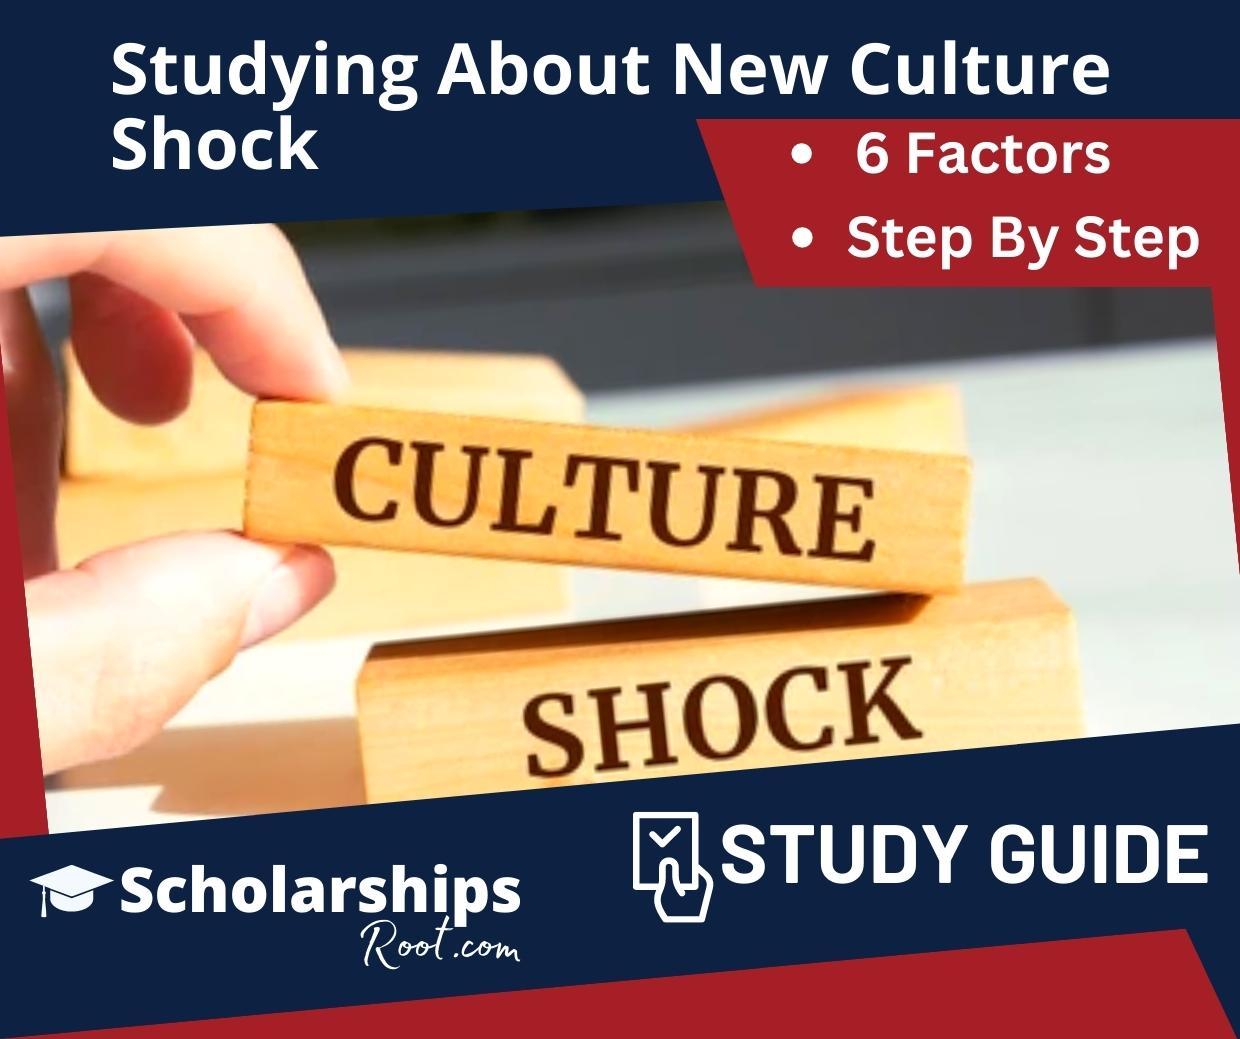 Studying About New Culture Shock And Its 6 Factors